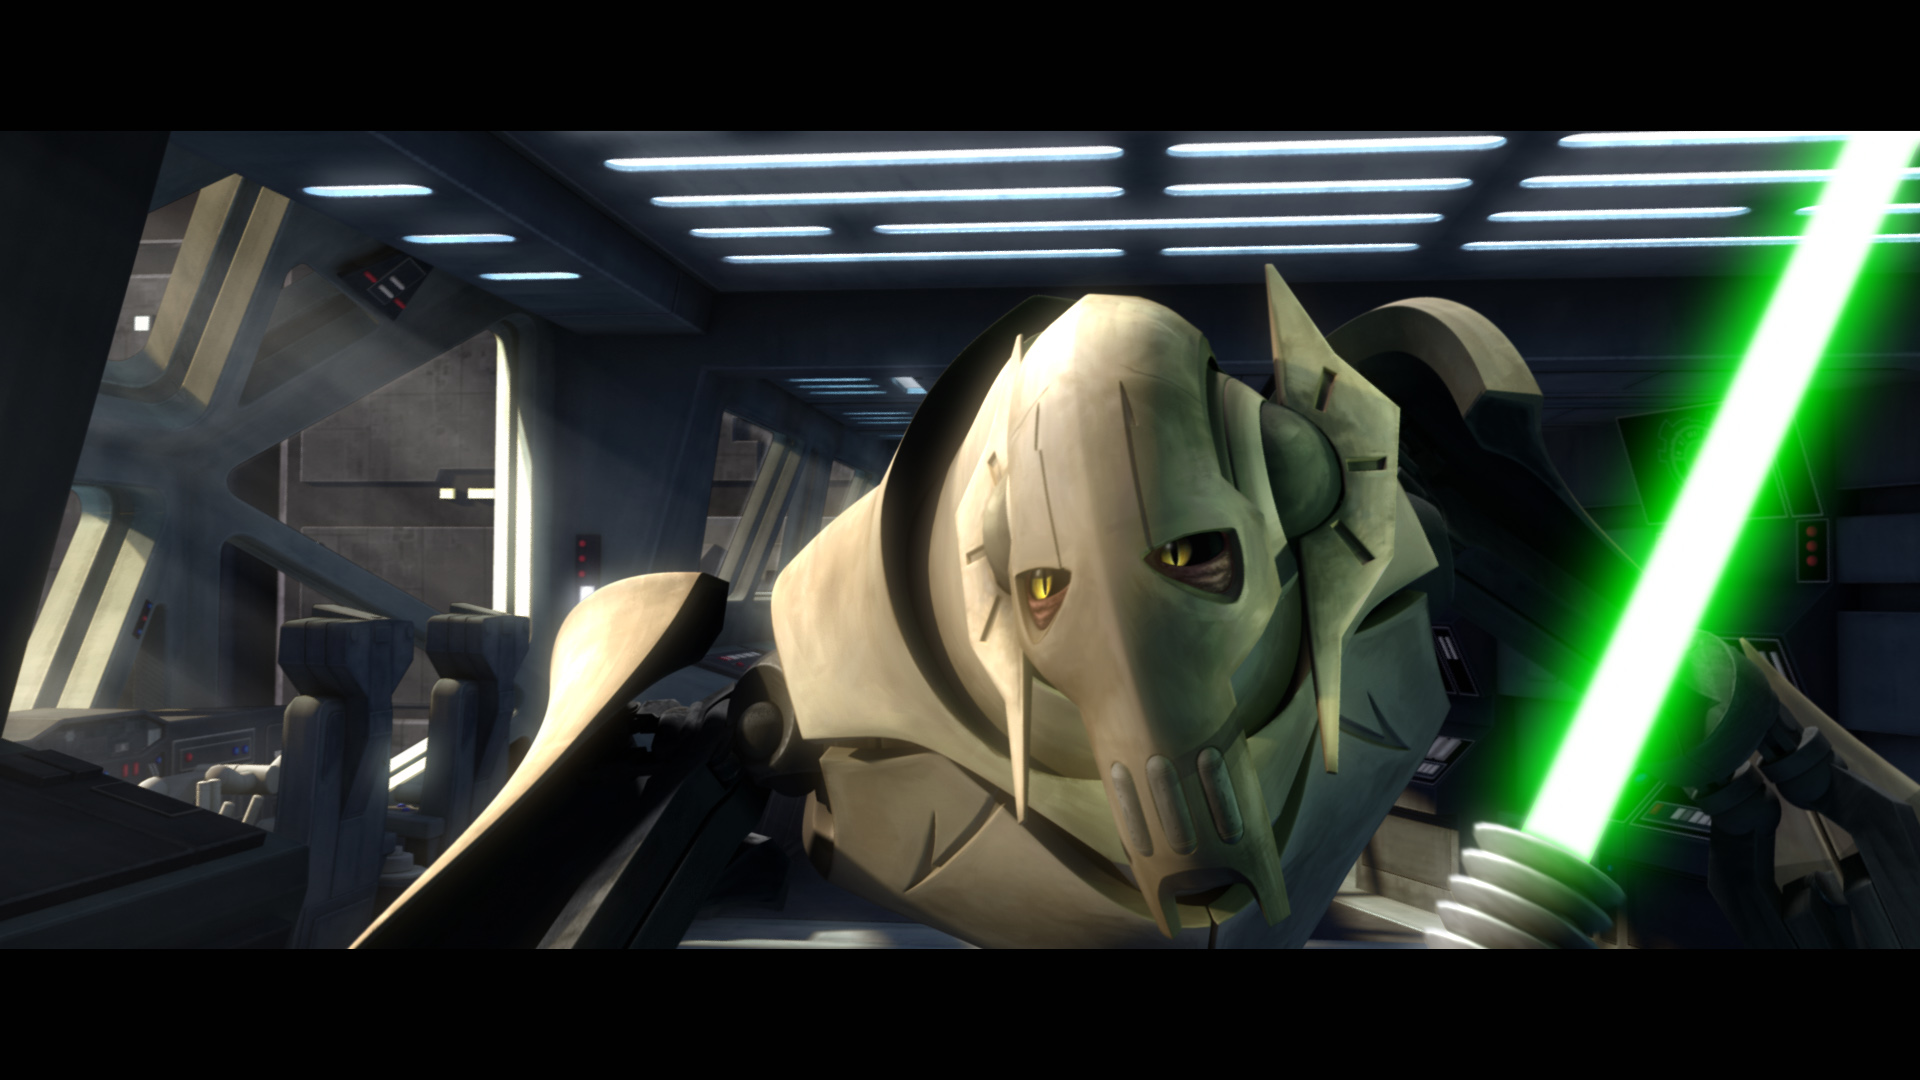 General Grievous springs a deadly trap for the Jedi heroes in “Grievous Intrigue,” an all-new episode of STAR WARS: THE CLONE WARS premiering at 9:00 p.m. ET/PT Friday, January 1 on Cartoon Network.     TM & © 2010 Lucasfilm Ltd. All rights reserved. 